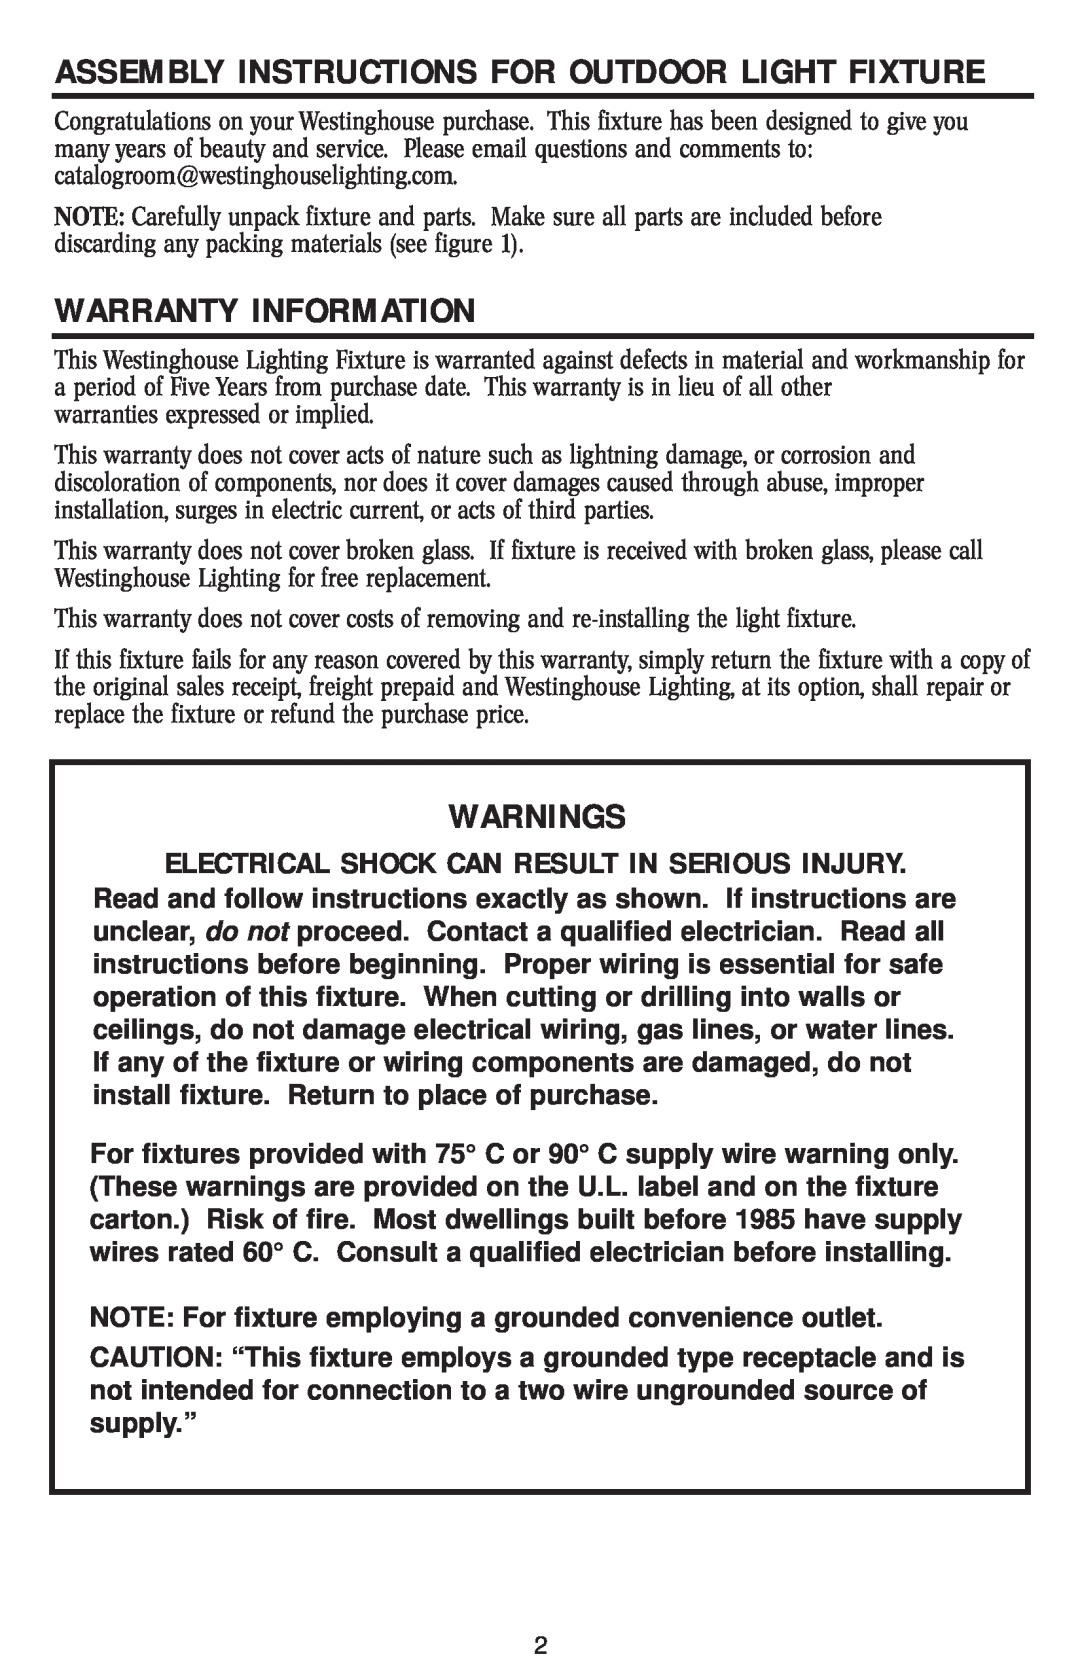 Westinghouse W-019 1/15/04 owner manual Warranty Information, Warnings, Assembly Instructions For Outdoor Light Fixture 